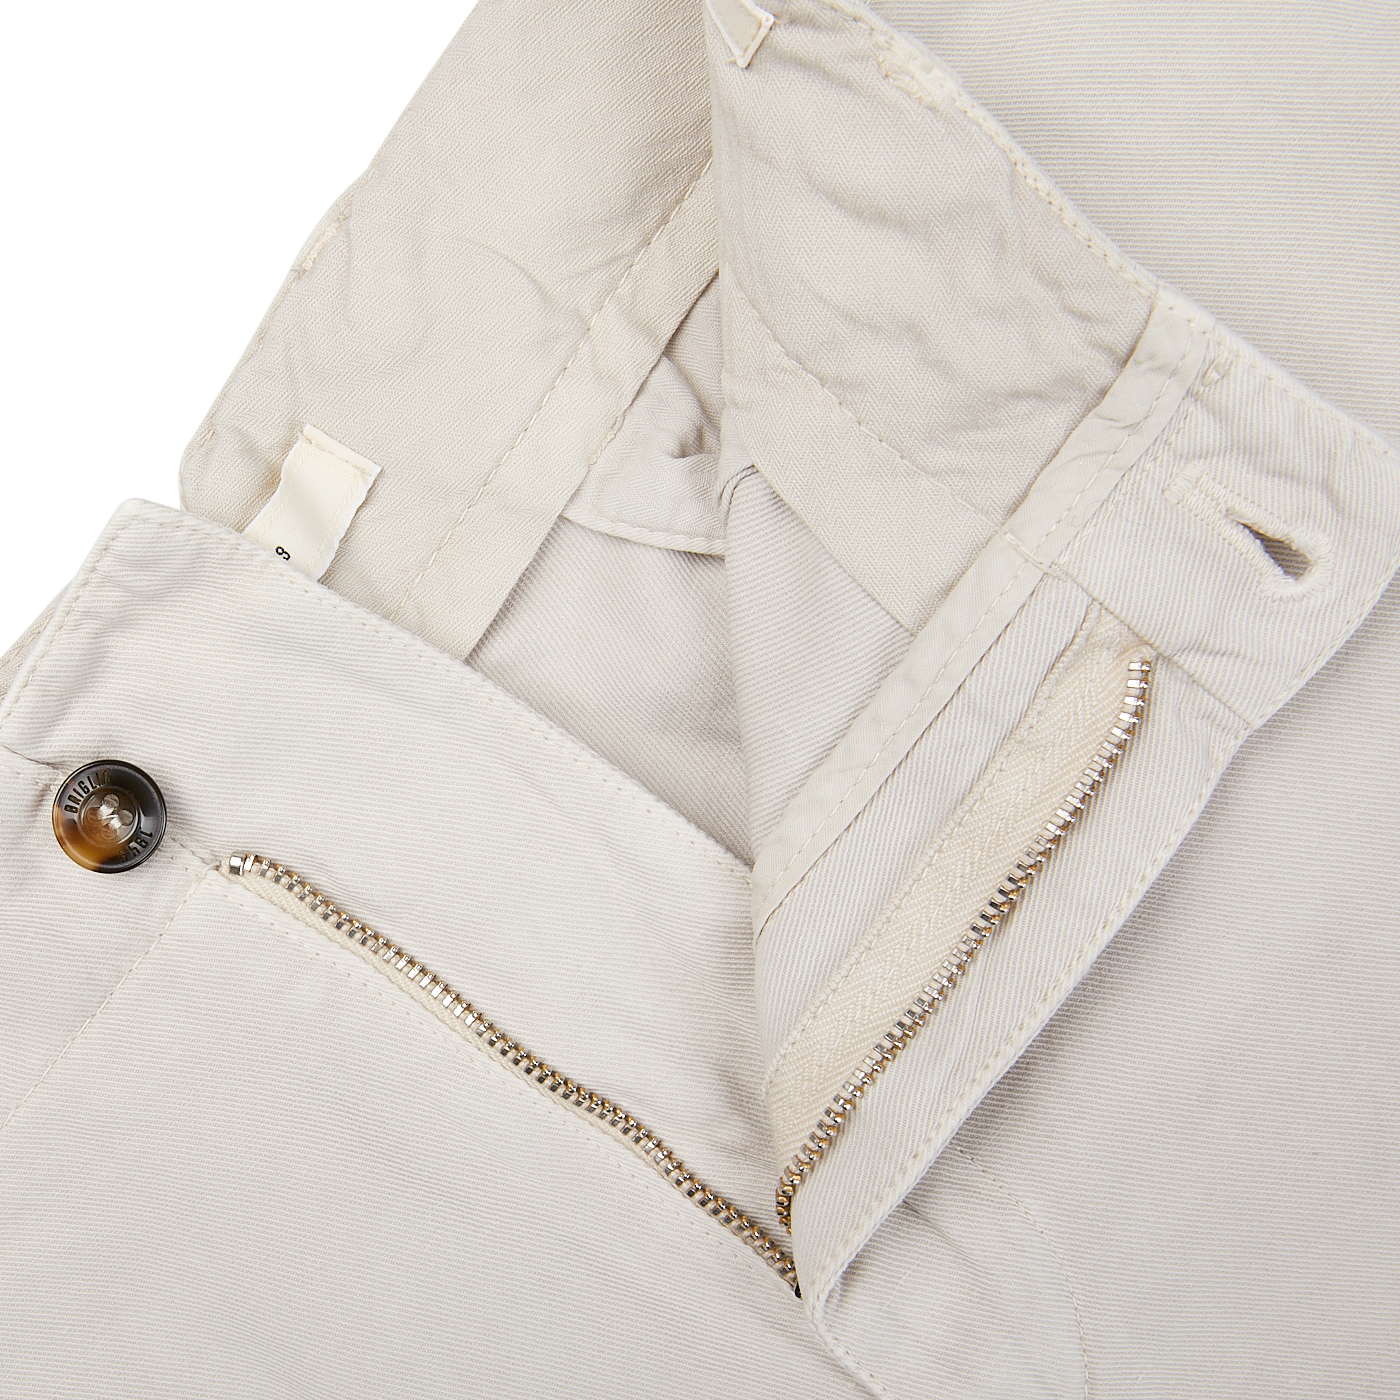 Stone Beige Cotton Linen Pleated Shorts with pocket and zipper detail by Briglia.